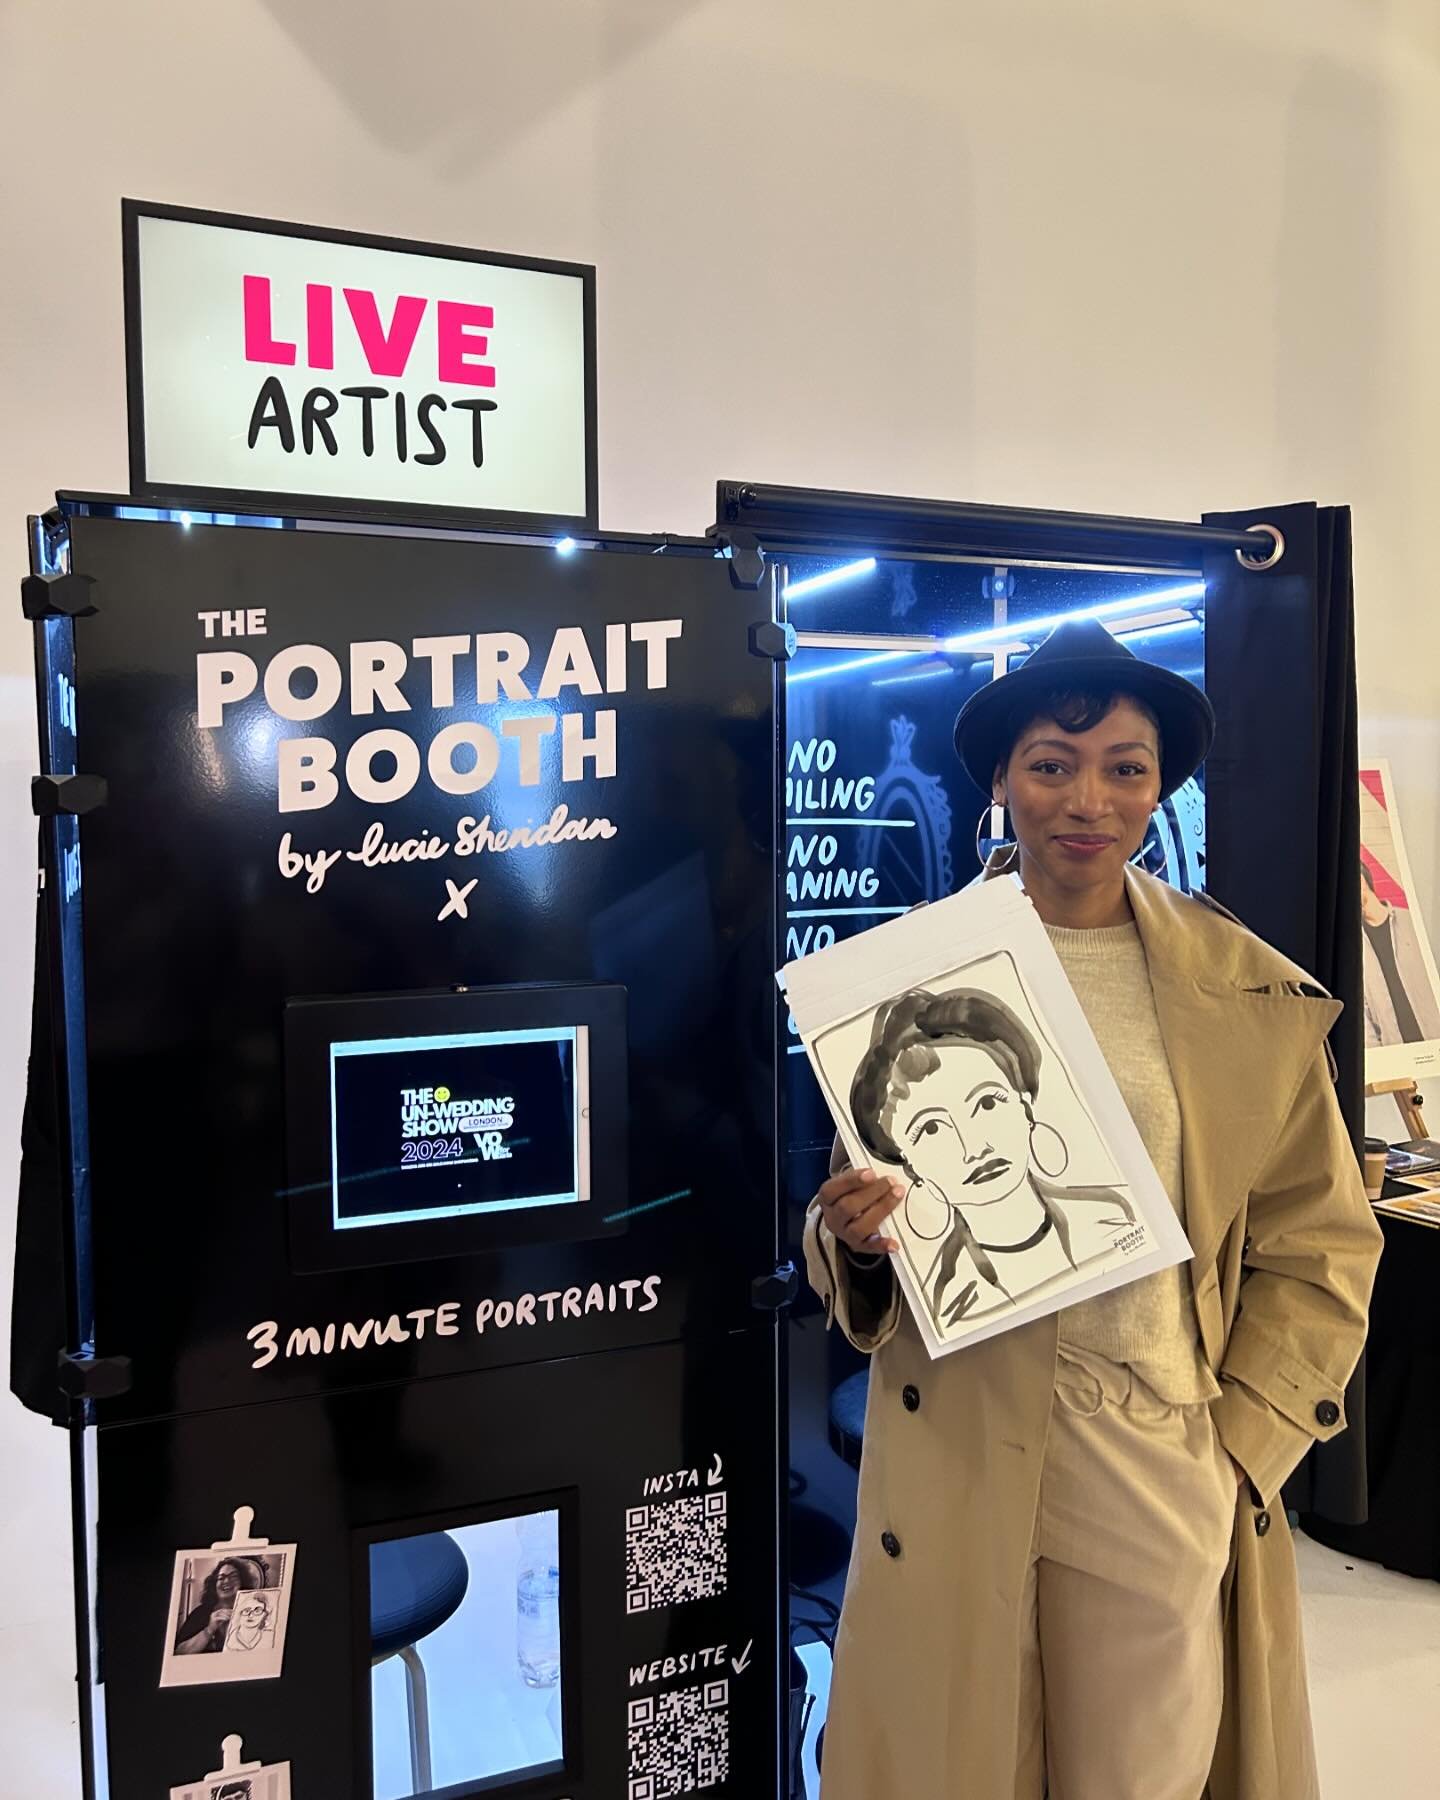 Imagine having a live portrait artist right there, in the midst of your festivities, capturing the love, and joy of your guests in just three minutes. Each painted portrait is a personal keepsake to cherish. Embrace the unconventional, embrace the ex